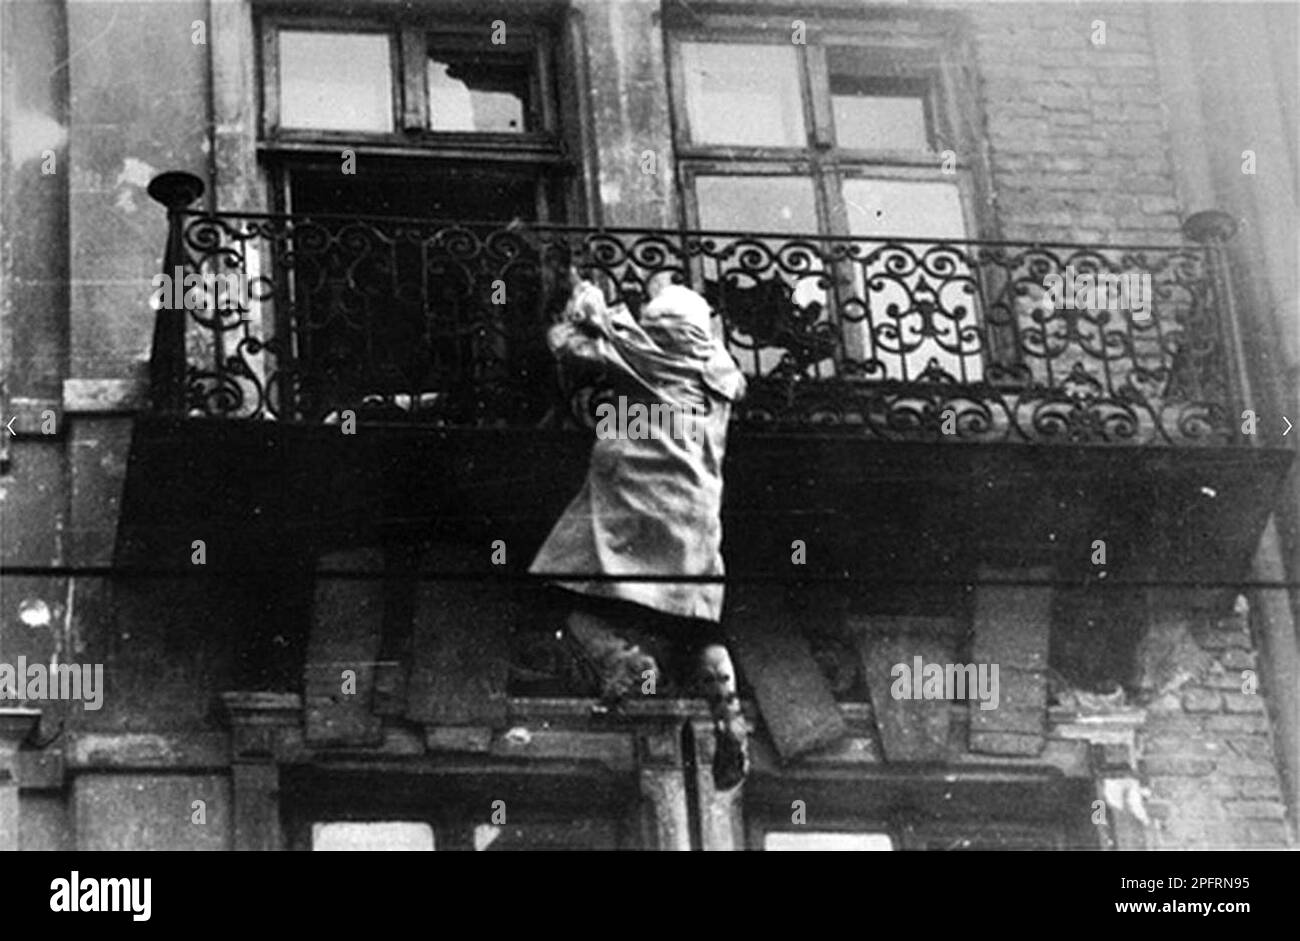 In January 1943 the nazis arrived to round up the Jews of the Warsaw Ghetto  The Jews, resolved to fight it out, took on the SS with homemade and primitive weapons. The defenders were executed or deported and the Ghetto area was systematically demolished. This event is known as The Ghetto Uprising. This image shows a woman hanging from a balcony preparing to drop to the street This image is from the German photographic record of the event, known as the Stroop report. Stock Photo